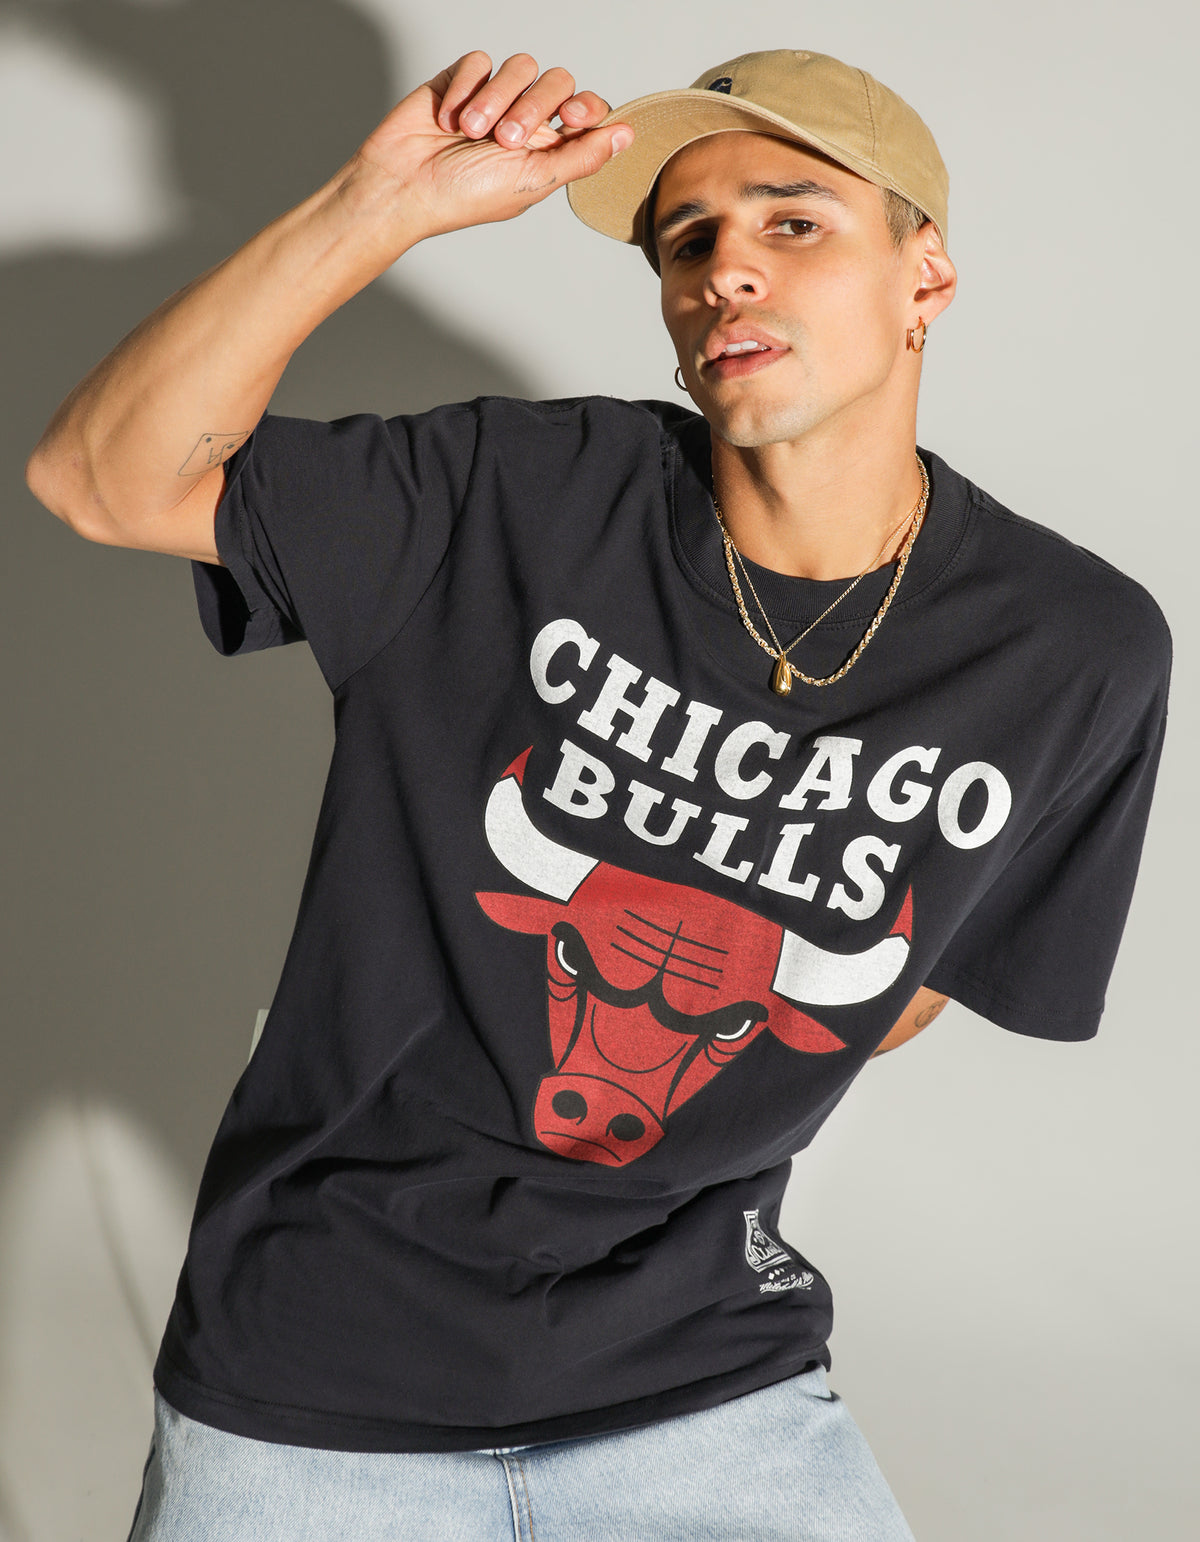 Chicago Bulls Vintage T-Shirt in Faded Black